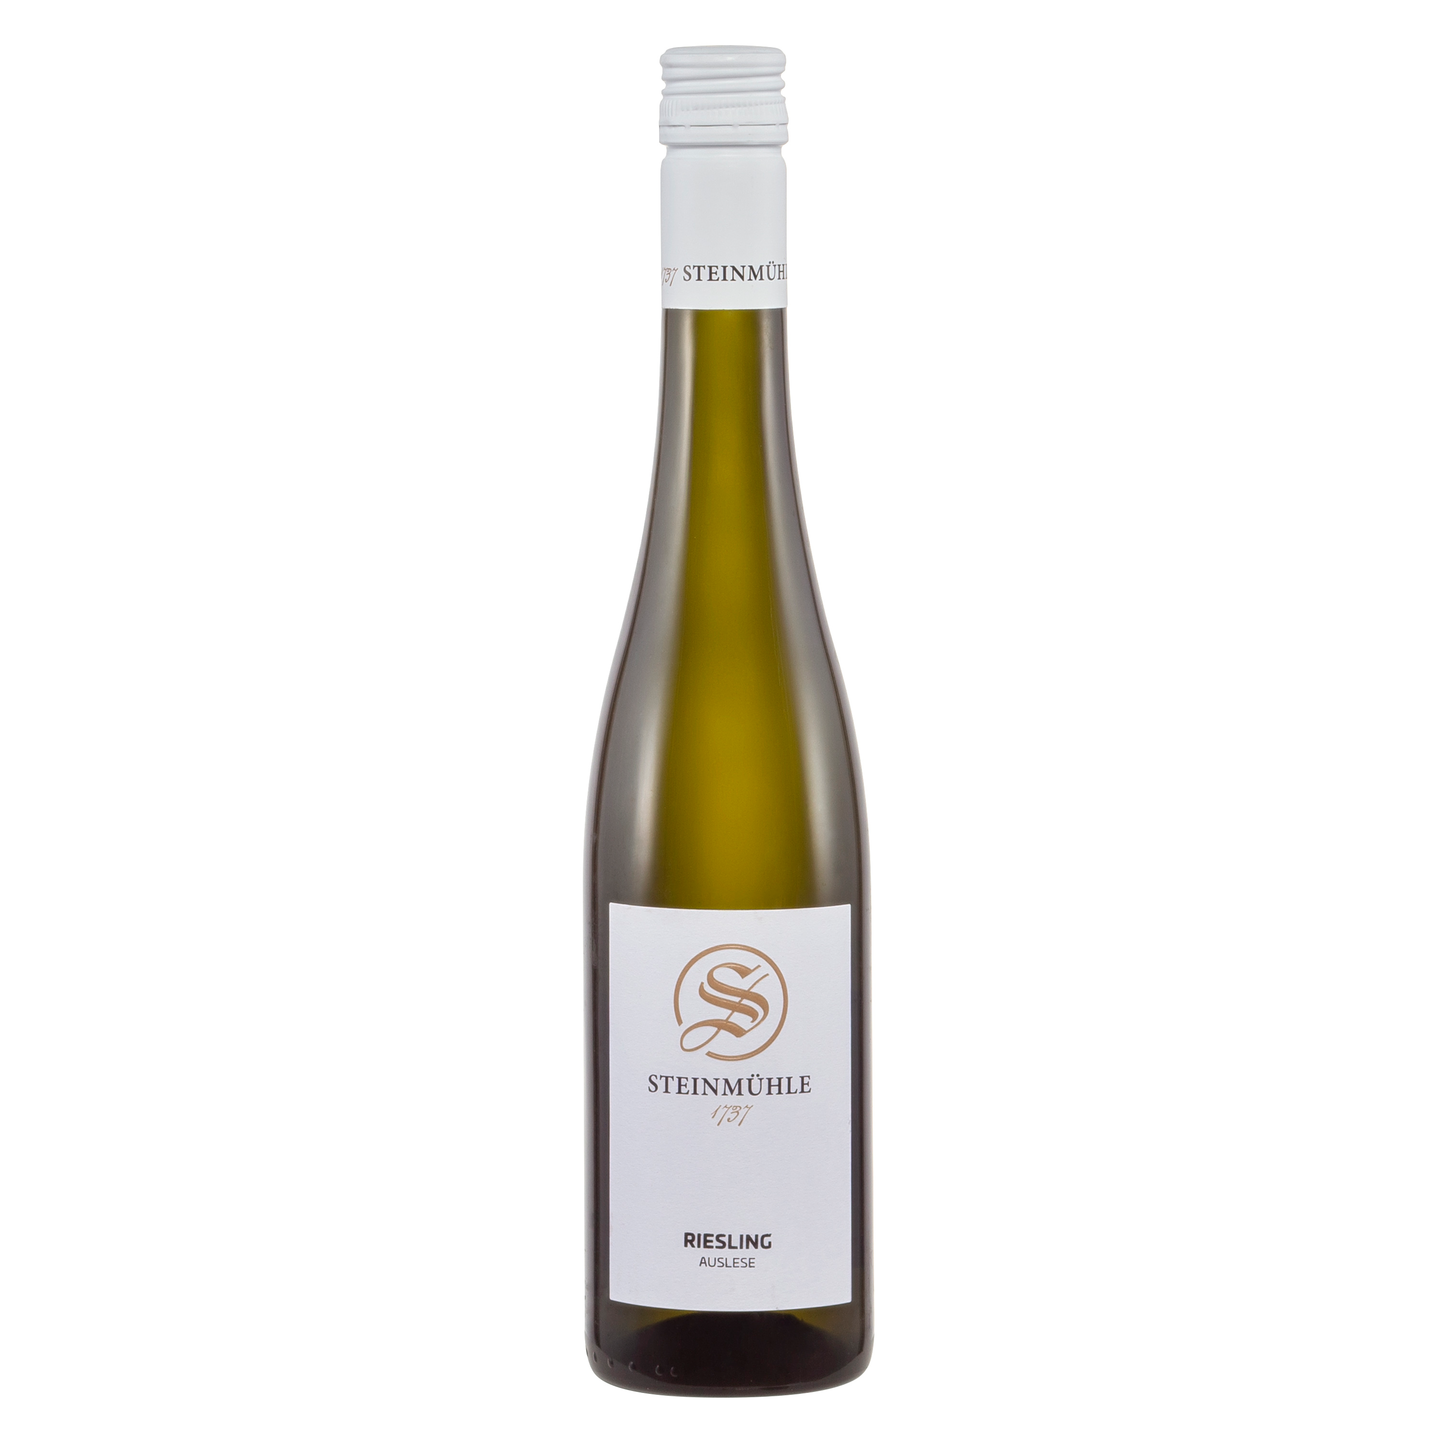 Steinmuhle Riesling Auslese 50cl 7,5%